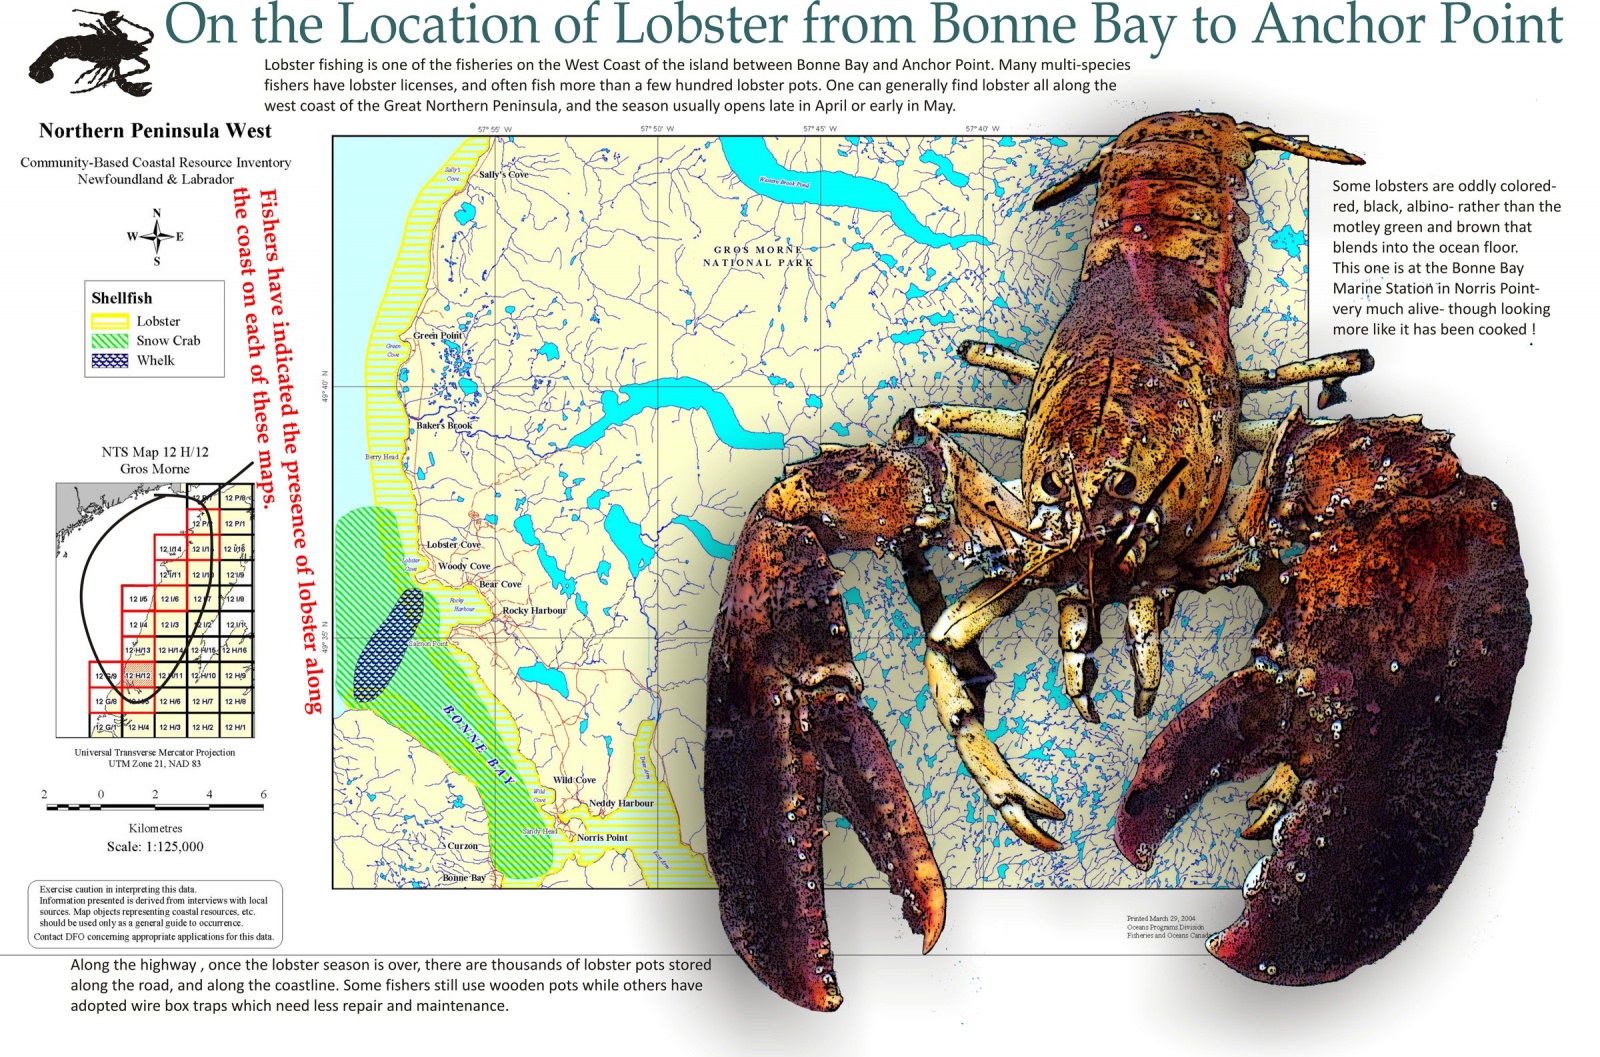 On the Location of Lobster from Bonne Bay to Anchor Point